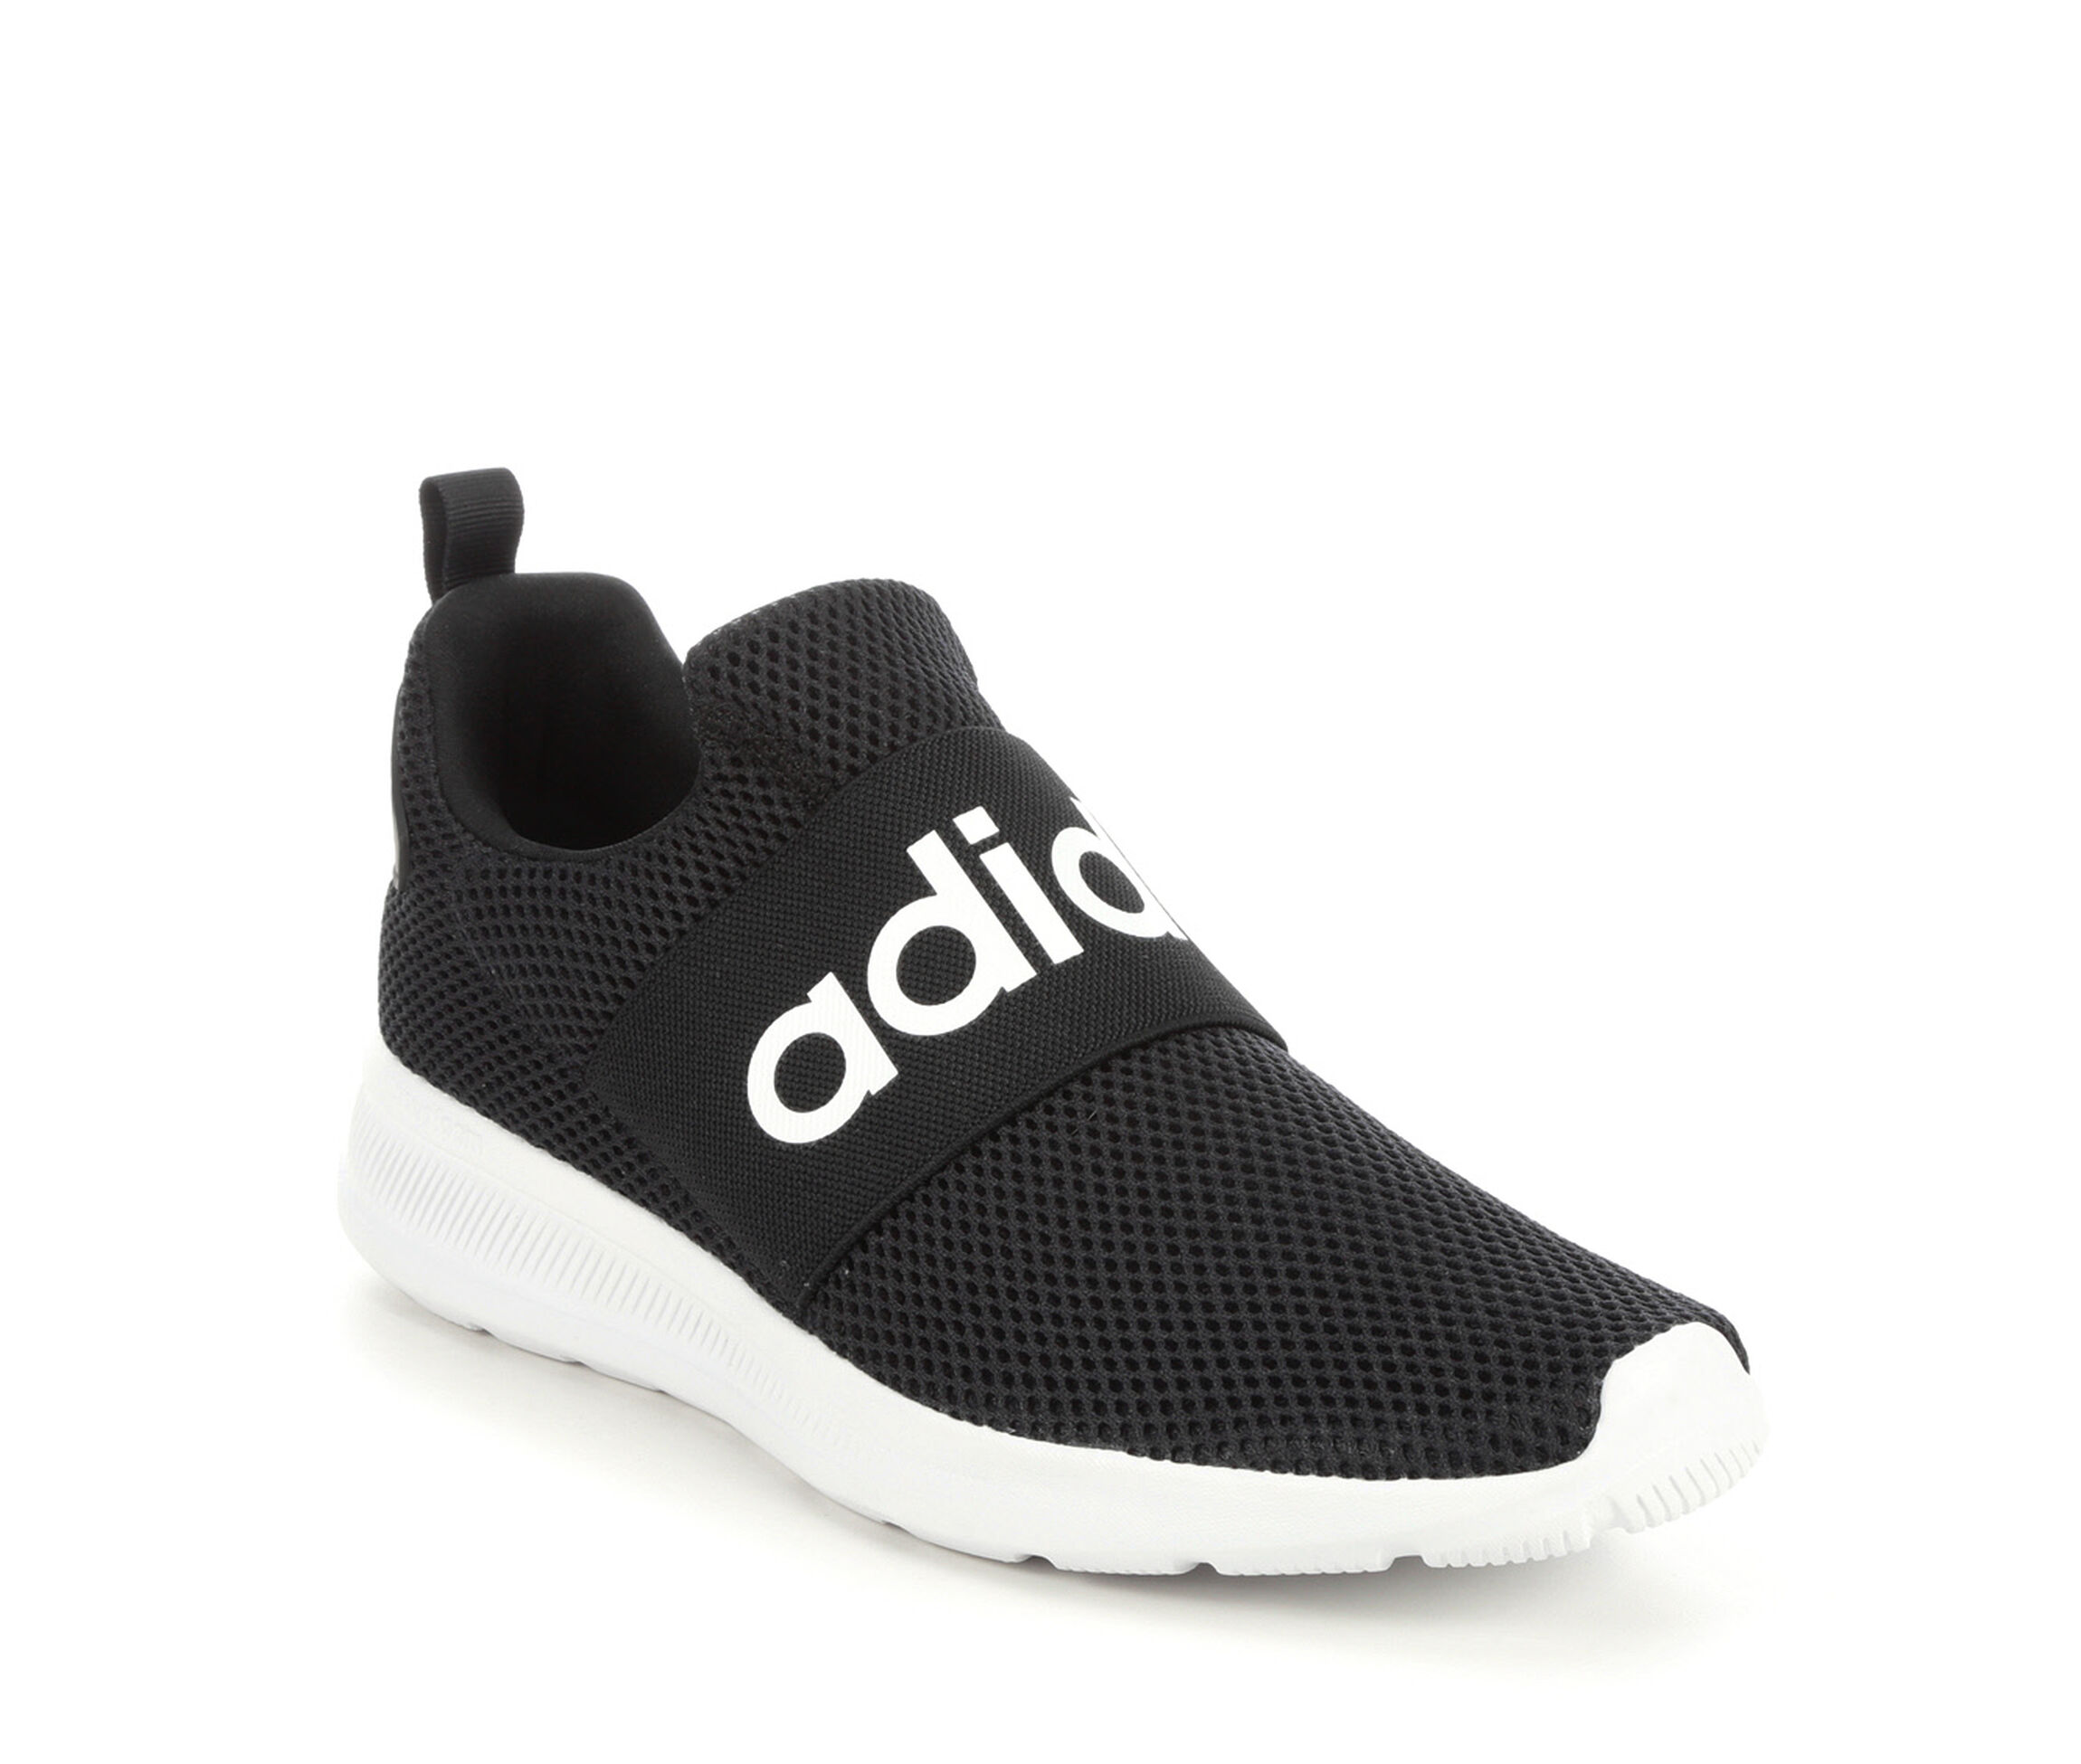 Adidas Sneakers, and Accessories